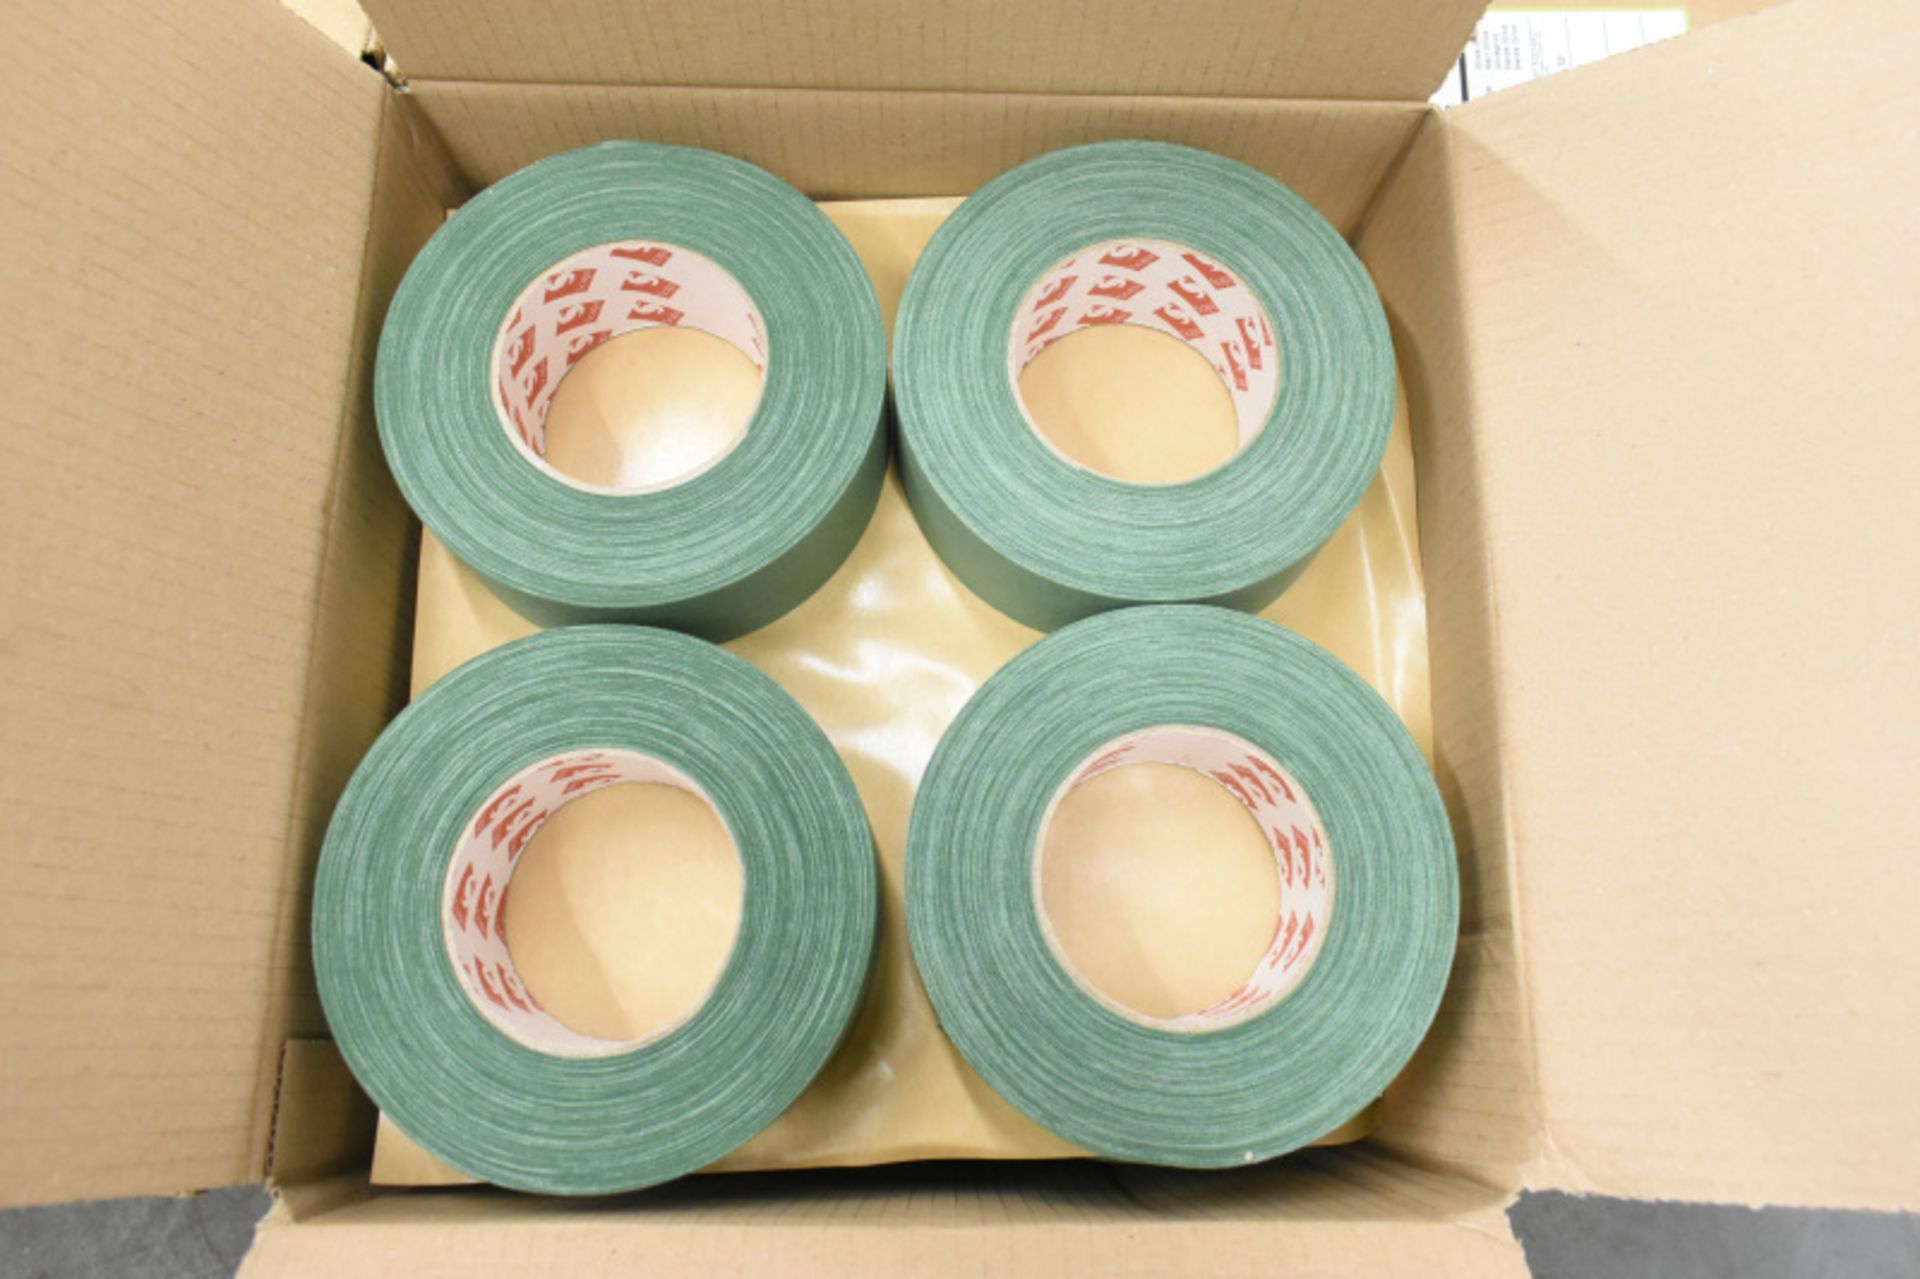 Scapa 3302 Pro Tape - Olive Green - 50mm x 50M rolls - 16 rolls per box - 2 boxes - manufactured 01/ - Image 2 of 4